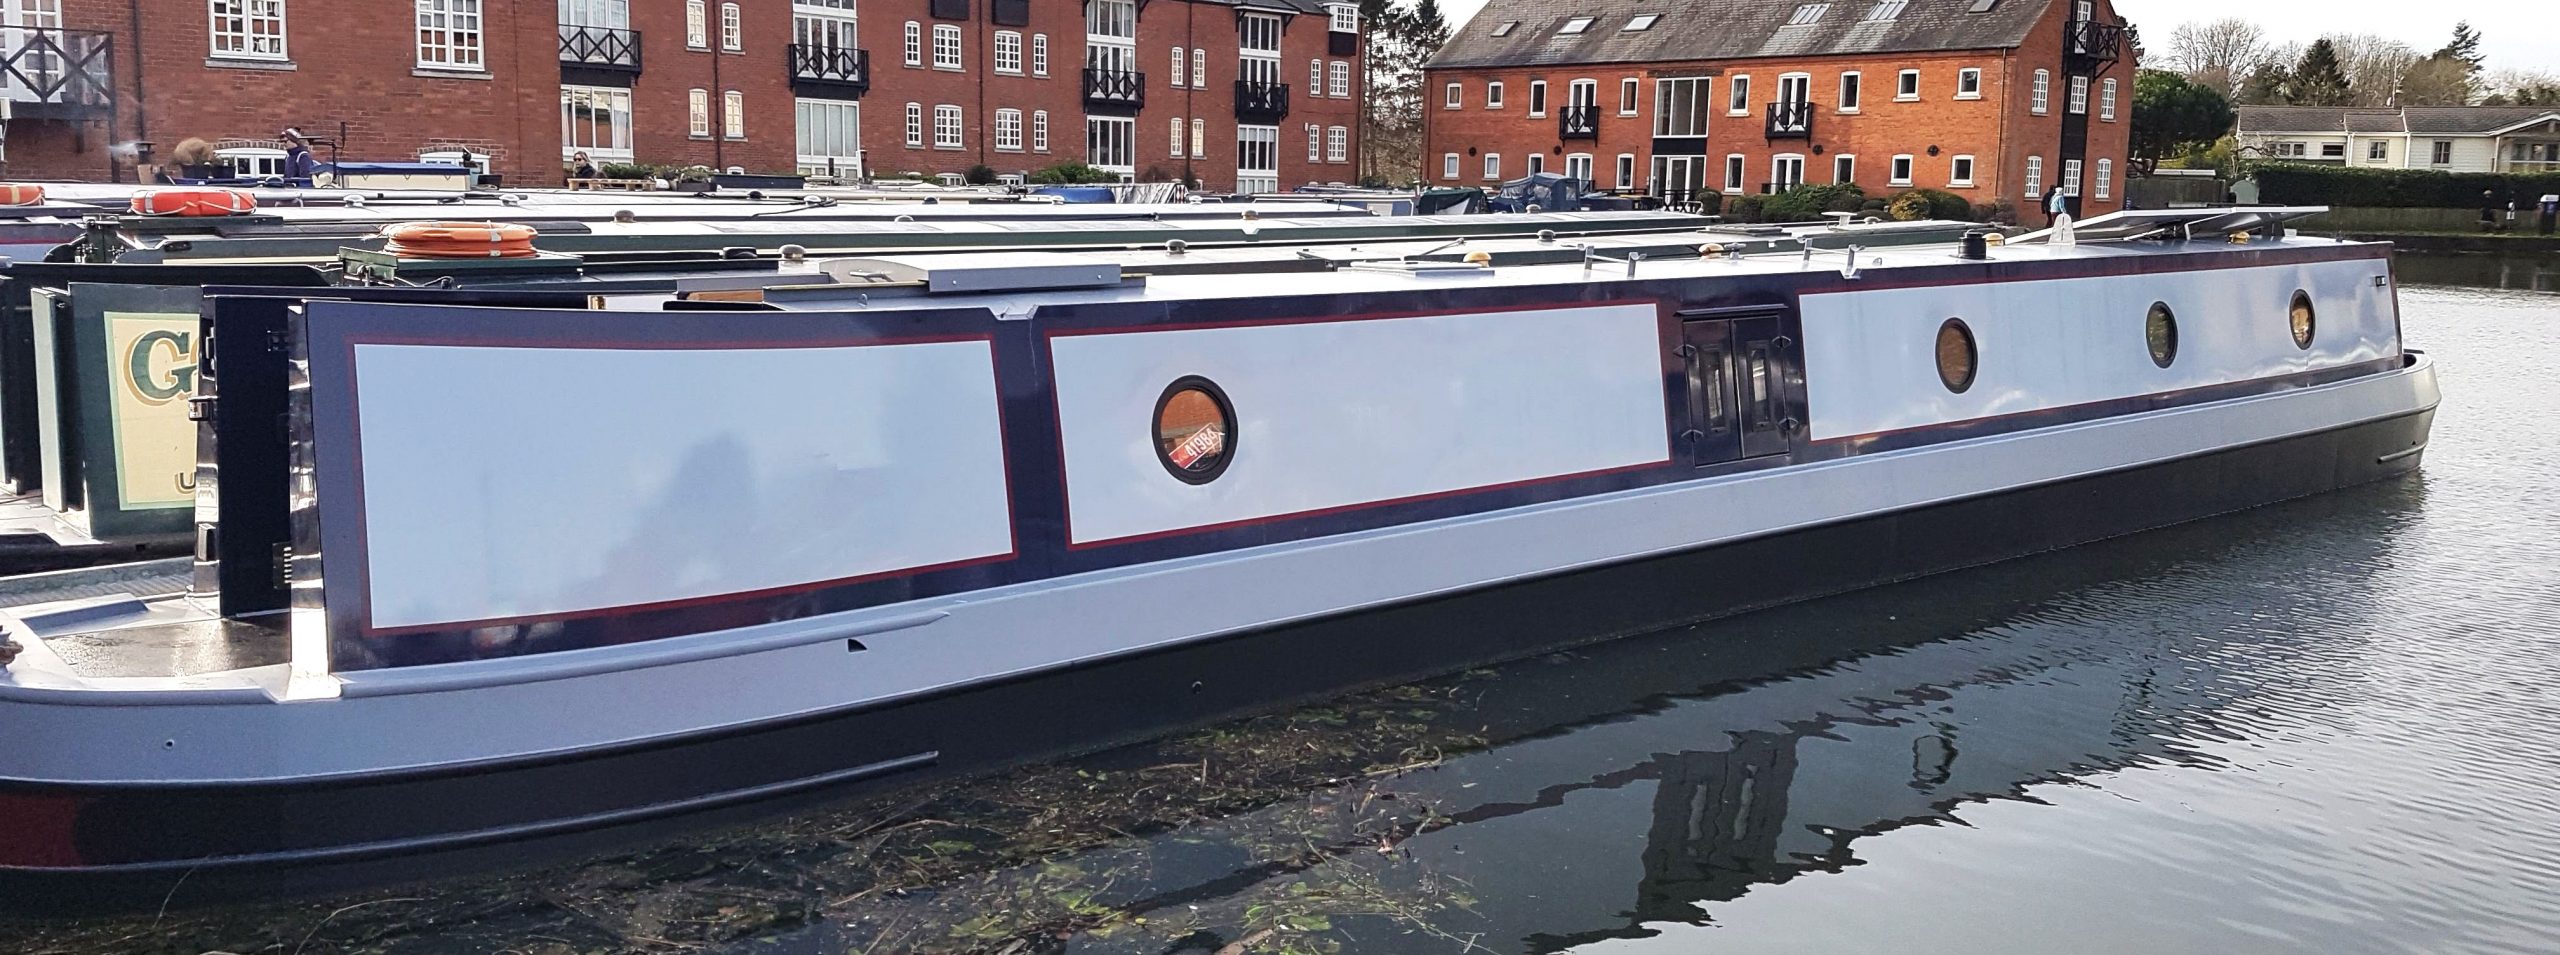 58 foot narrowboat for sale 